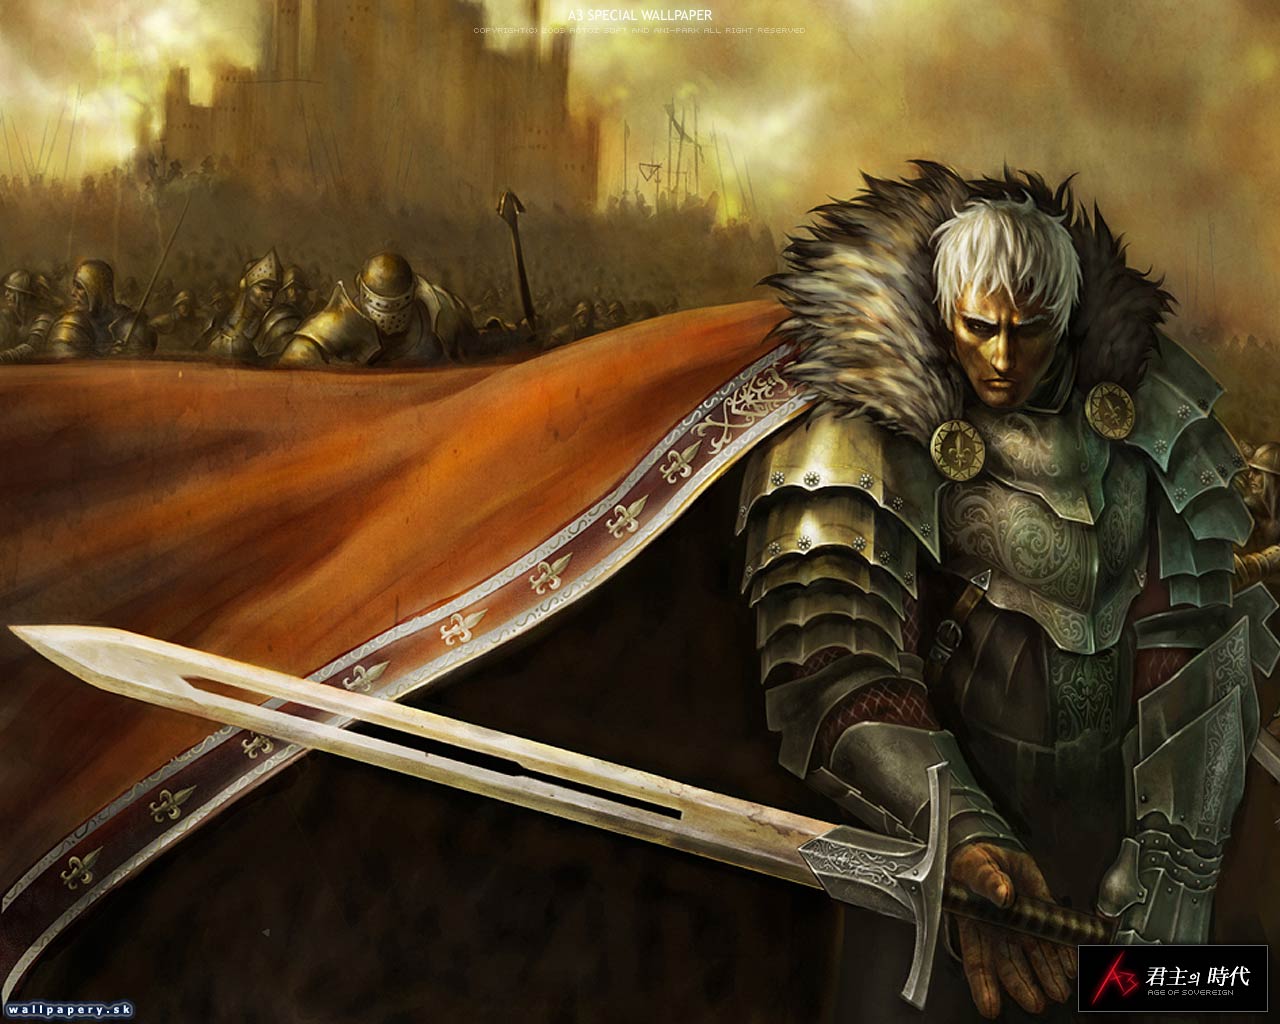 A3 - The Age of Sovereign - wallpaper 2